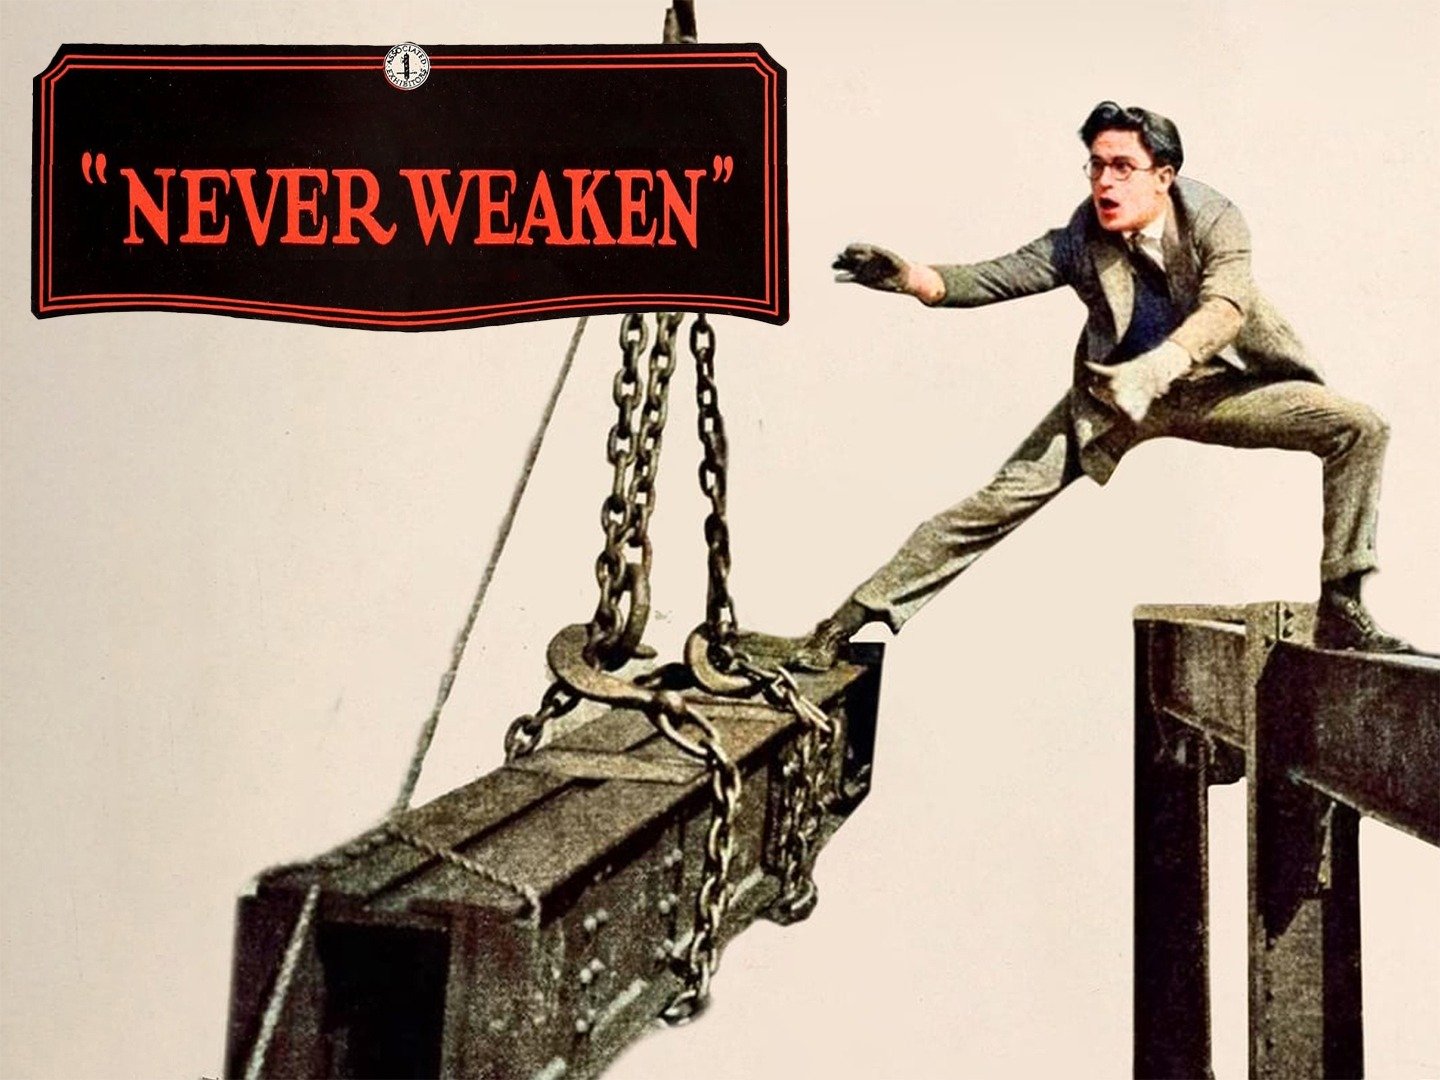 45-facts-about-the-movie-never-weaken